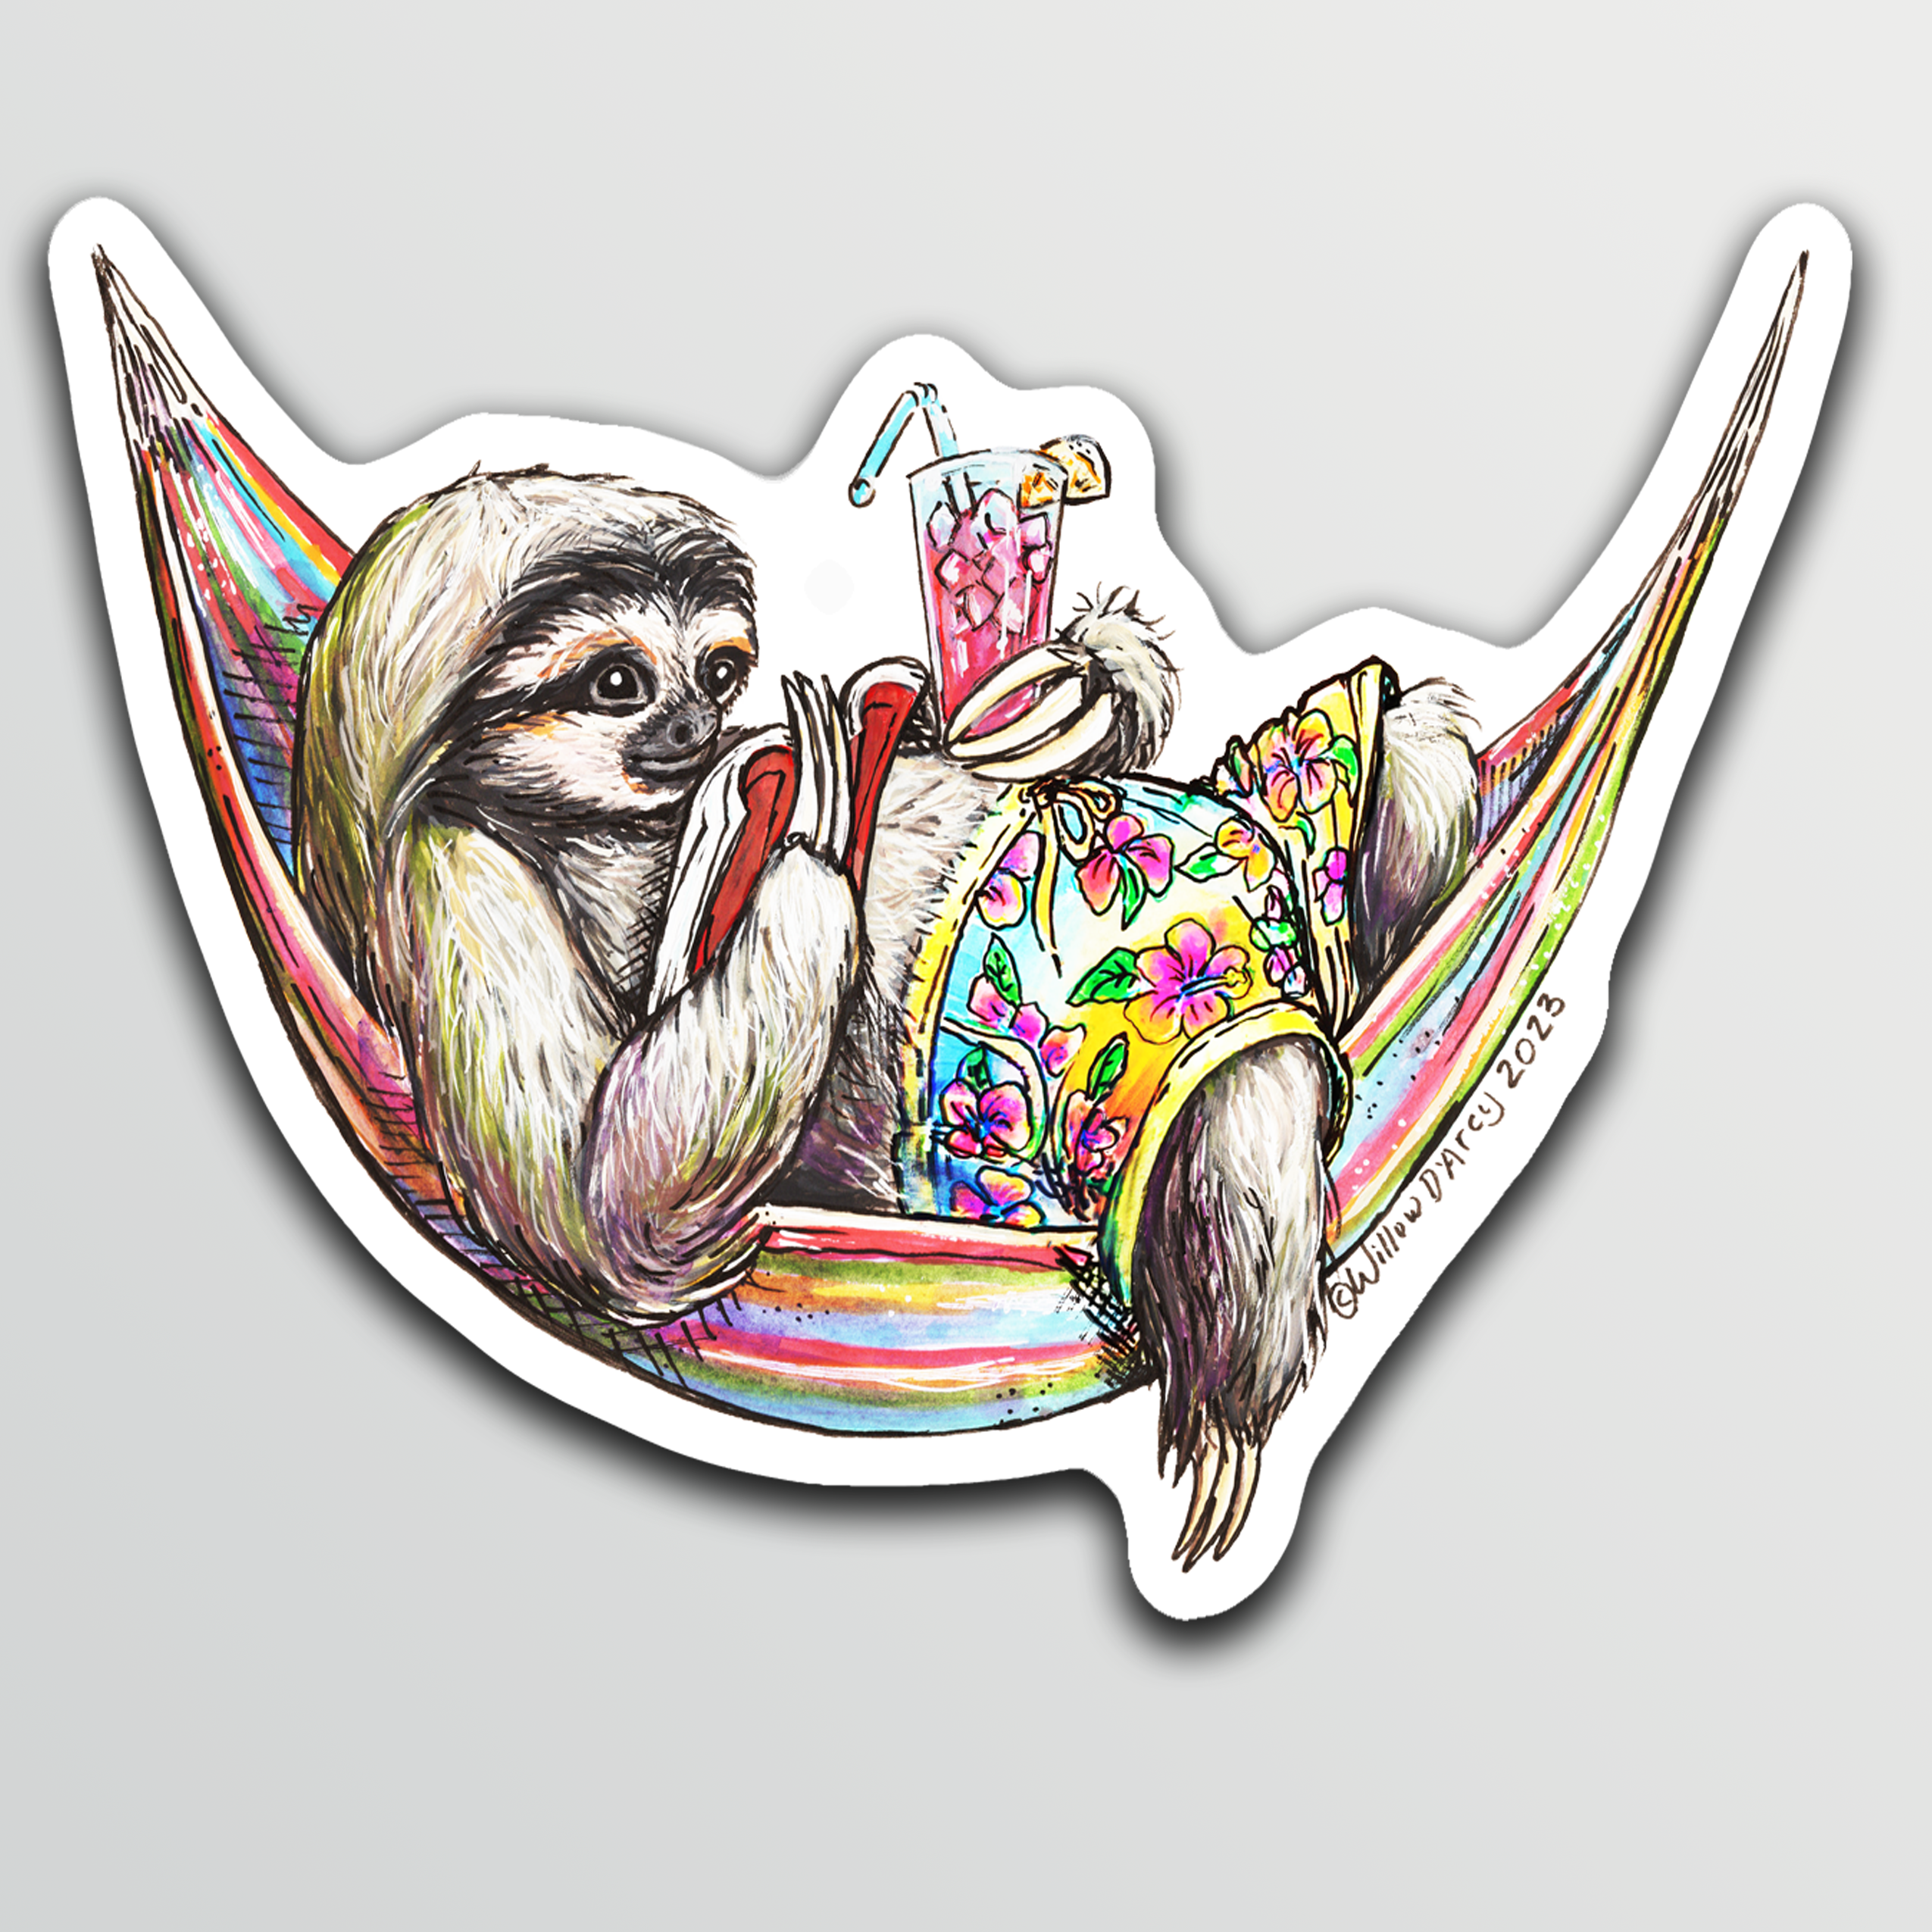 Sticker of an illustration of a sloth in a colorful hammock wearing tropical shorts, holding a pink drink and reading a book.